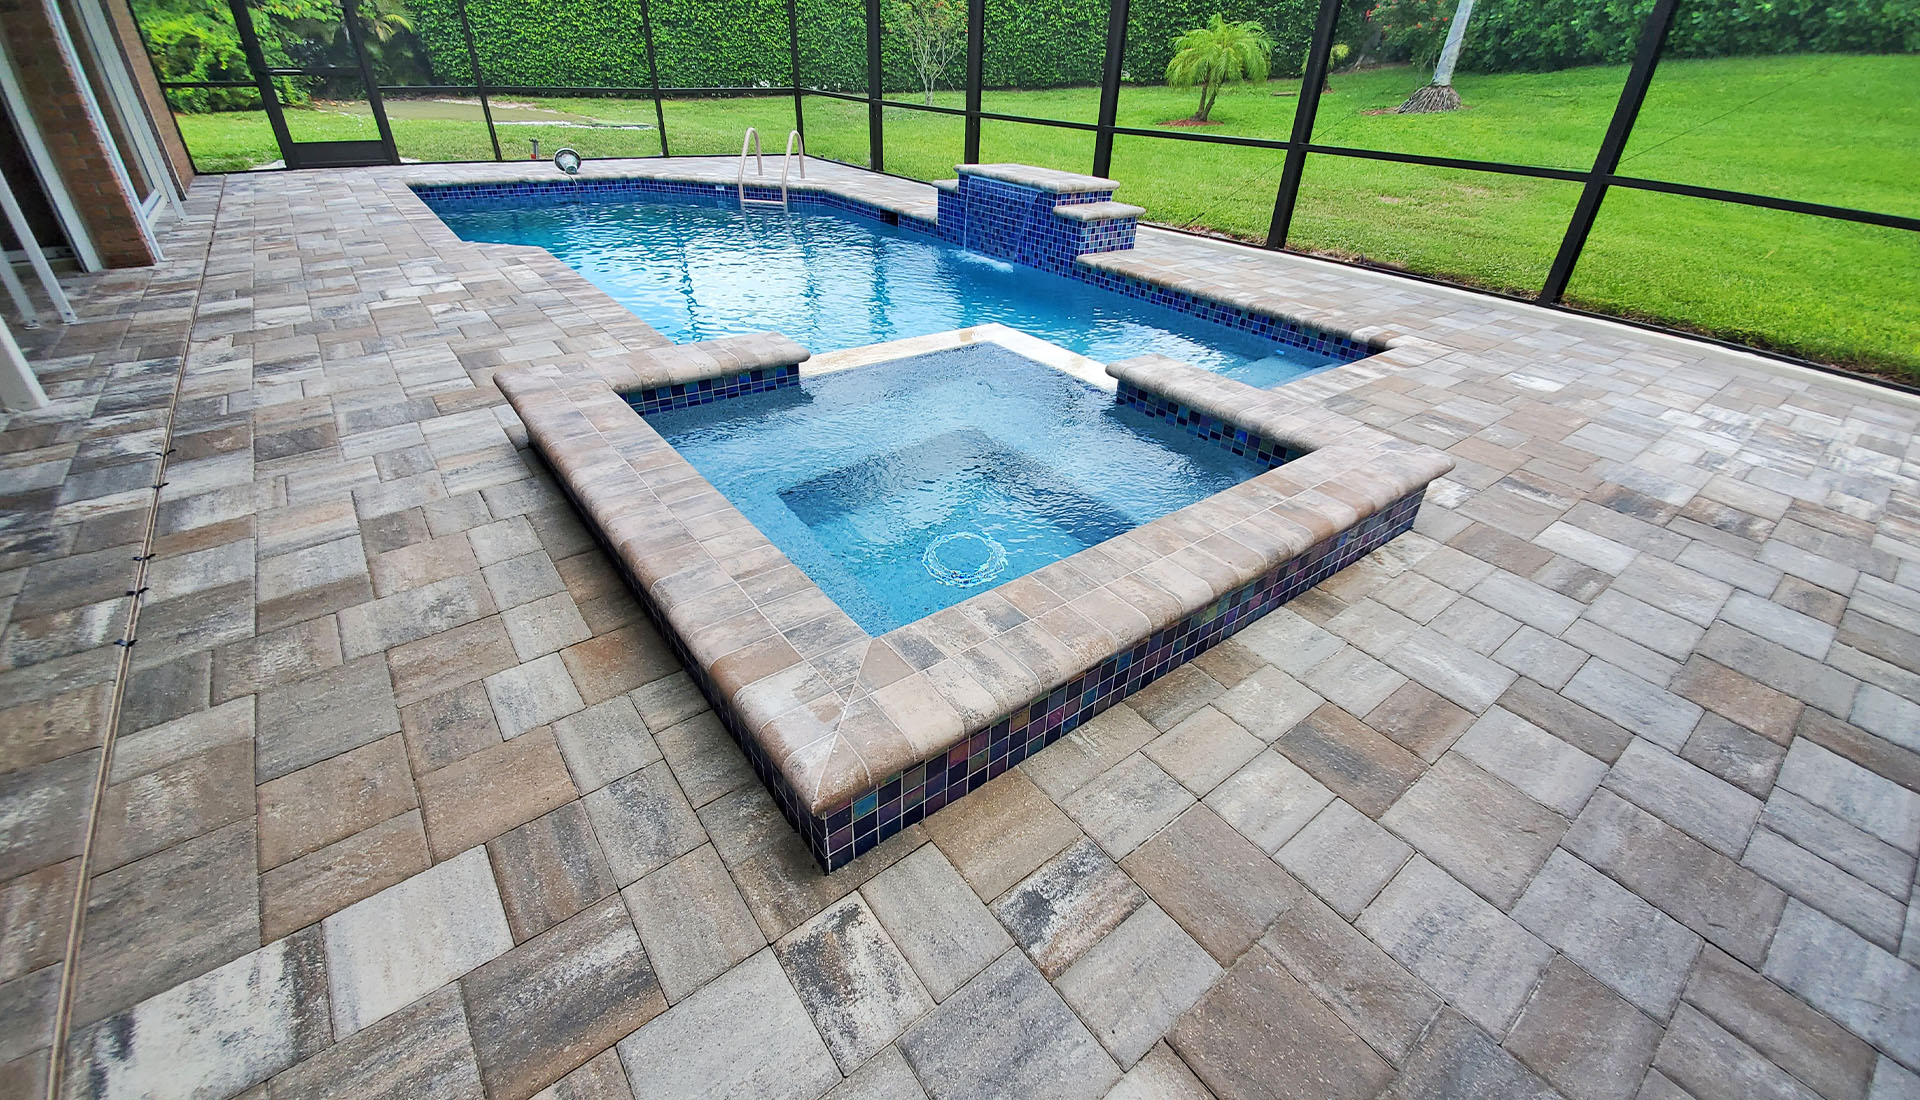 Cement Paver swimming pool decking by Pool and Deck Concepts